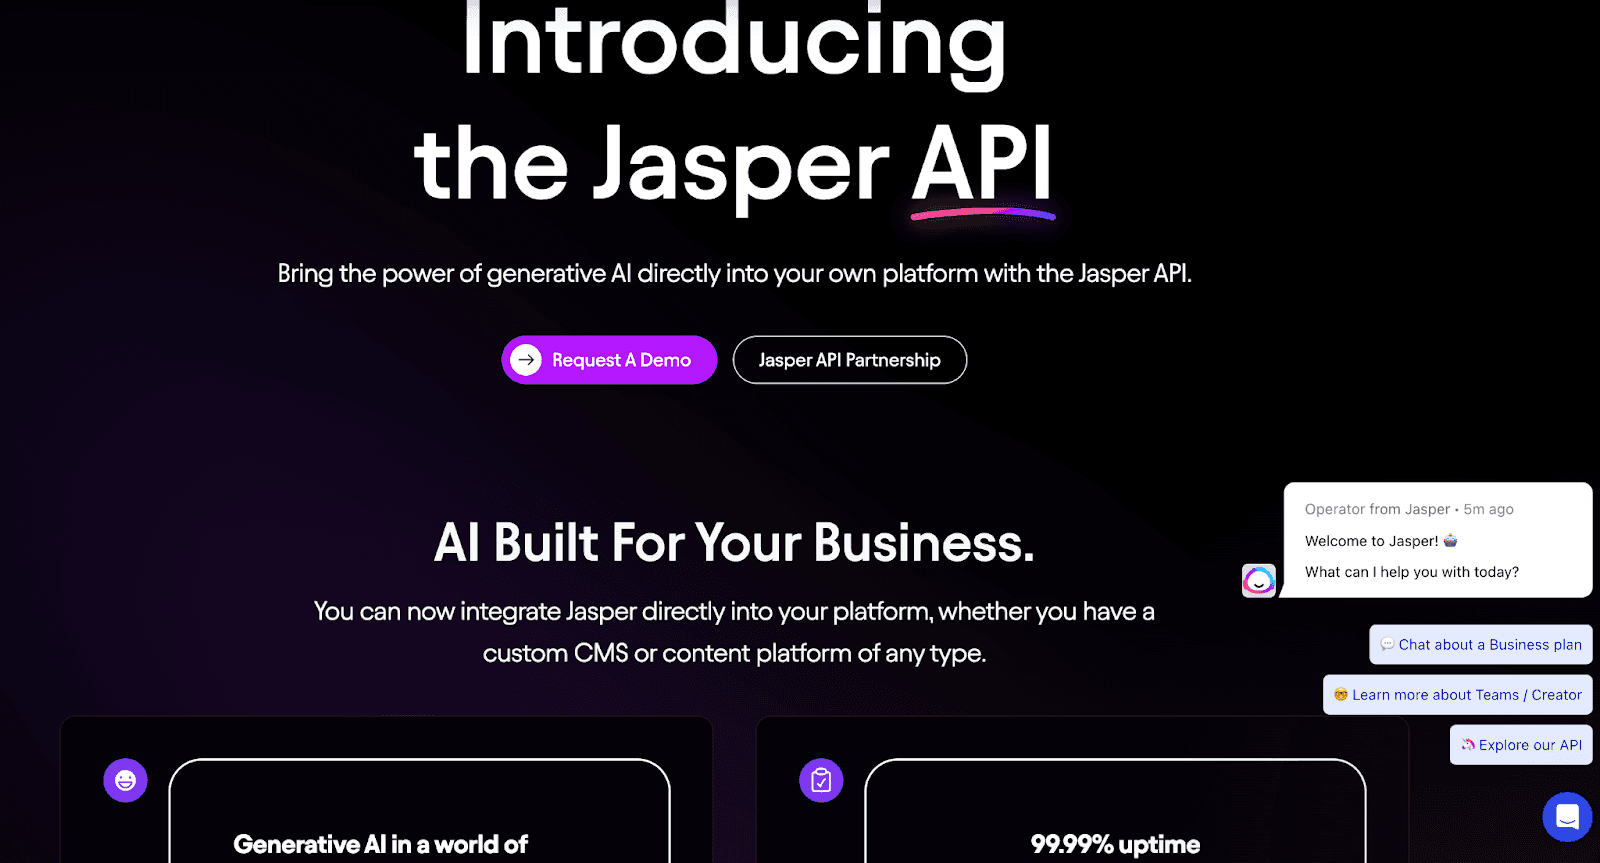 Introducing the Jasper API - Bring the power of generative AI directly into your own platform with the Jasper API.